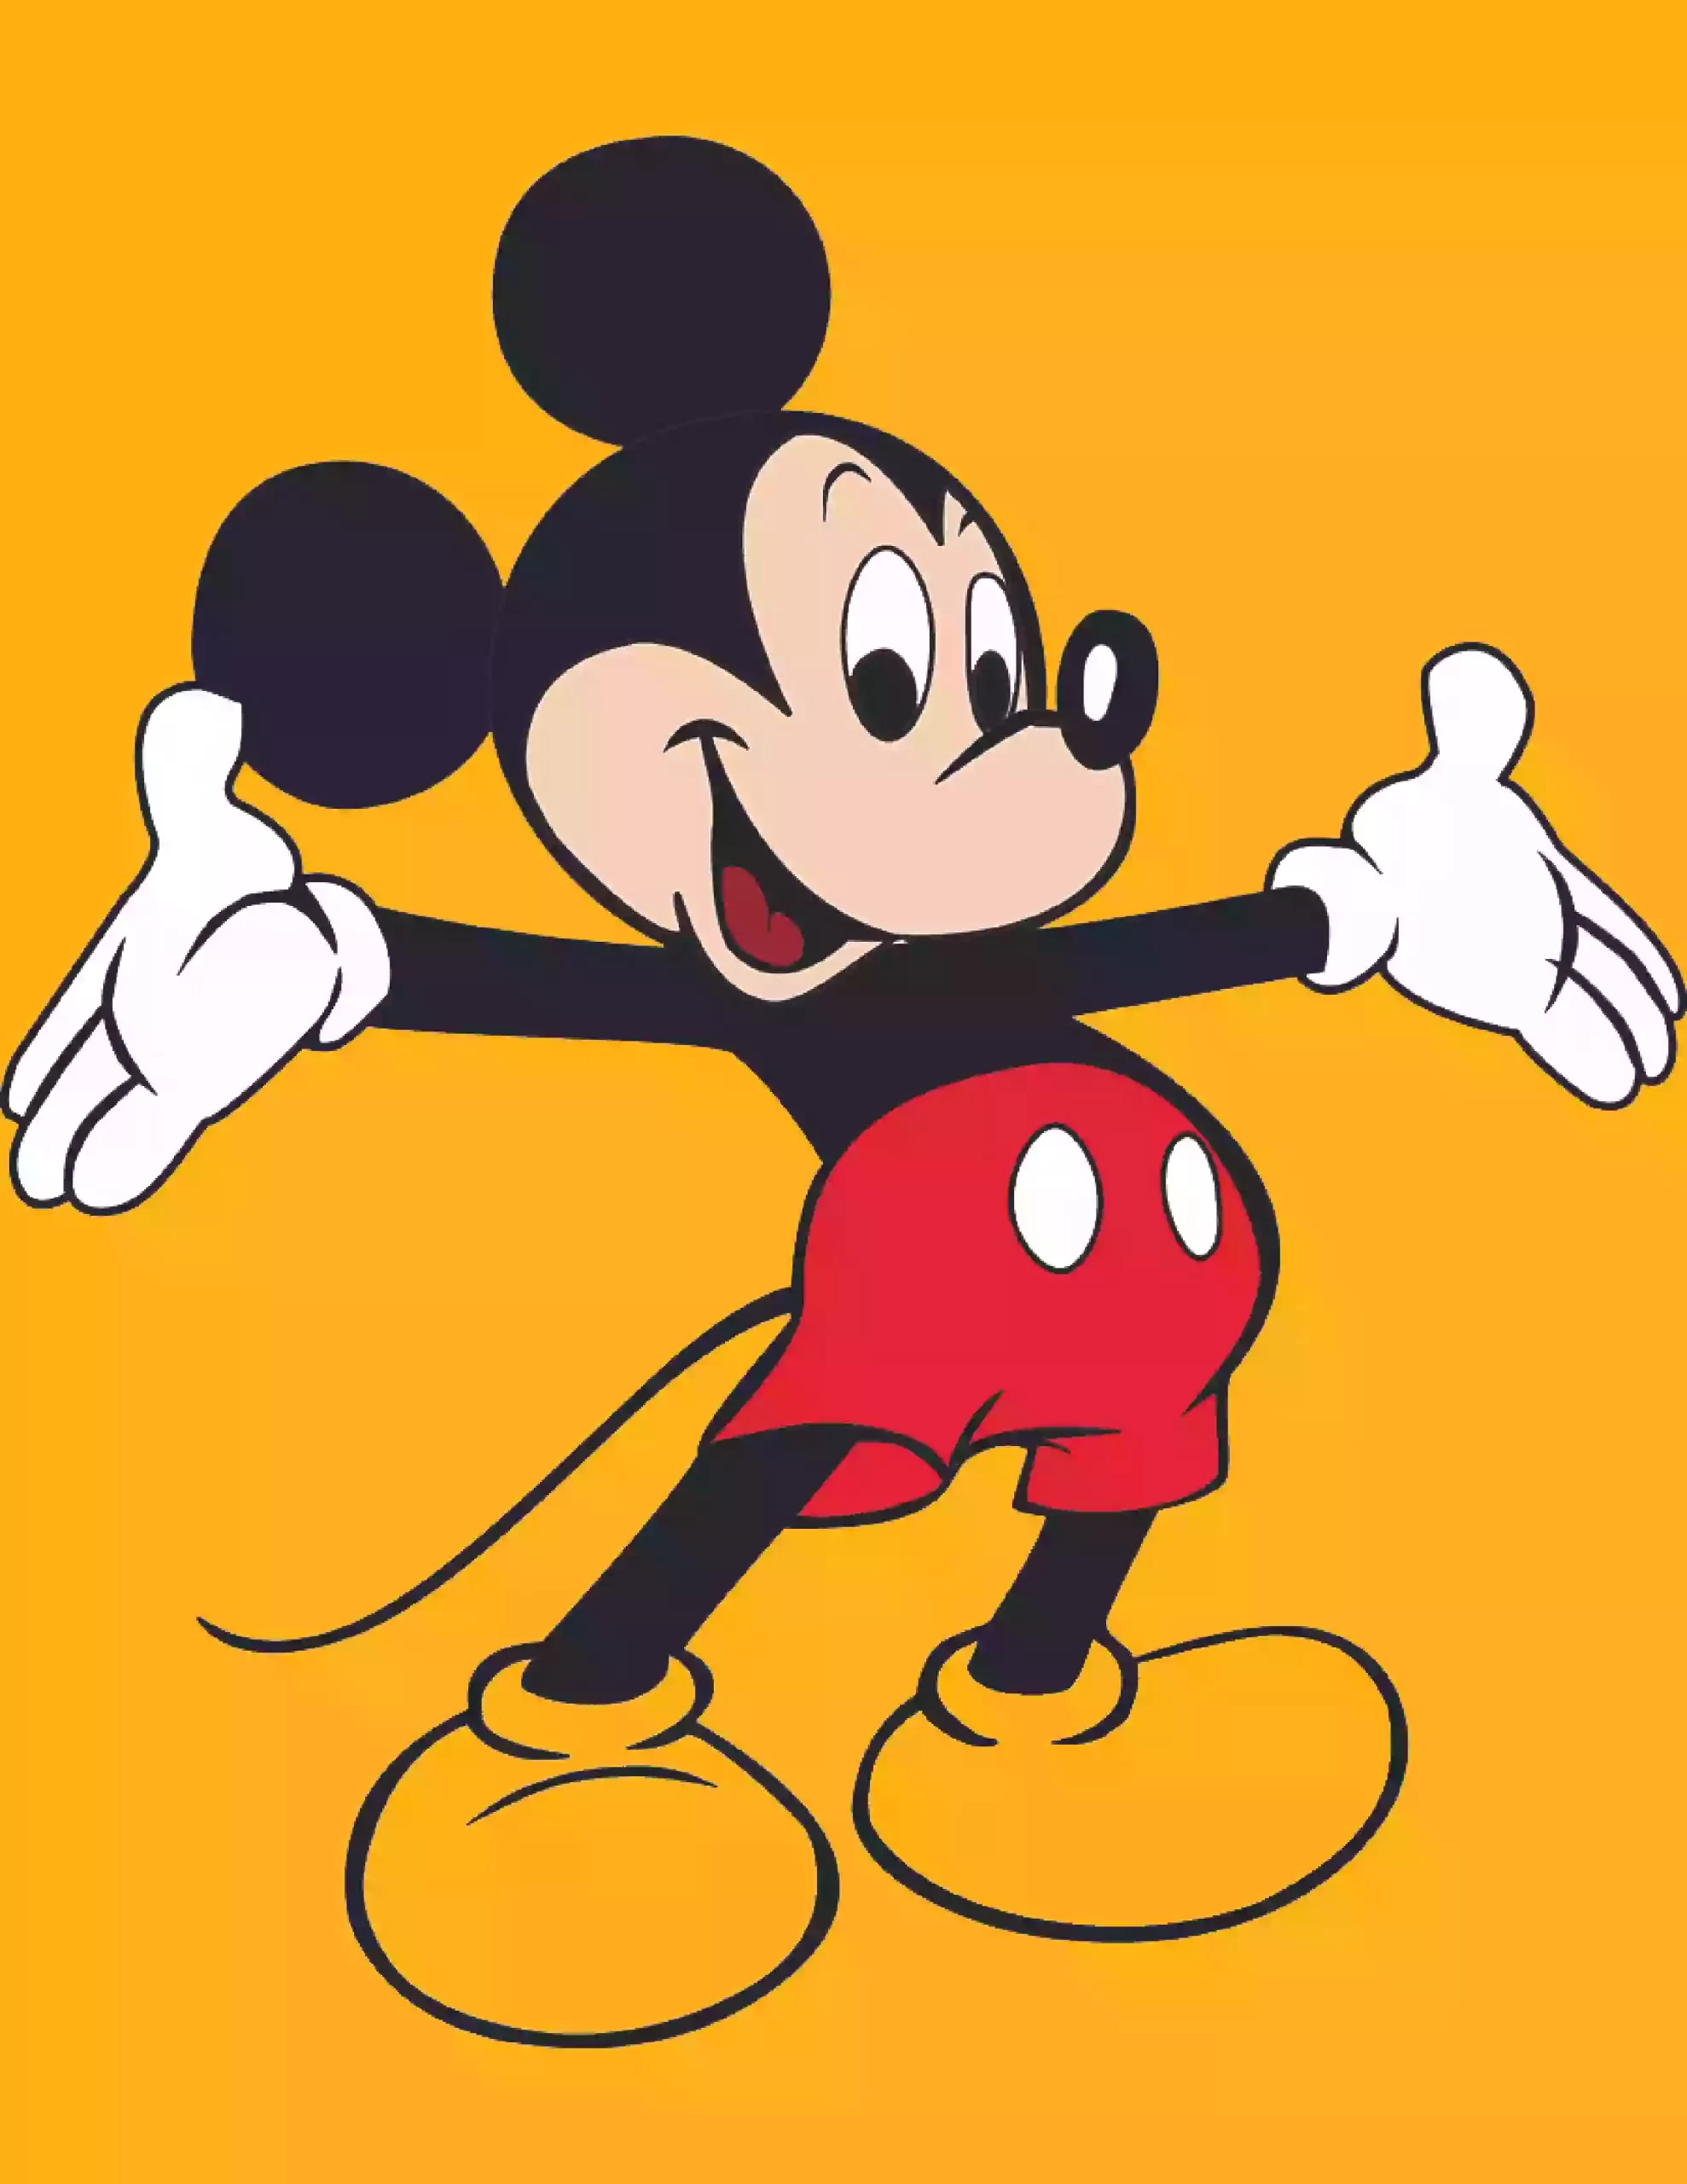 Drawing Mickey Mouse - Timelapse | Artology - YouTube